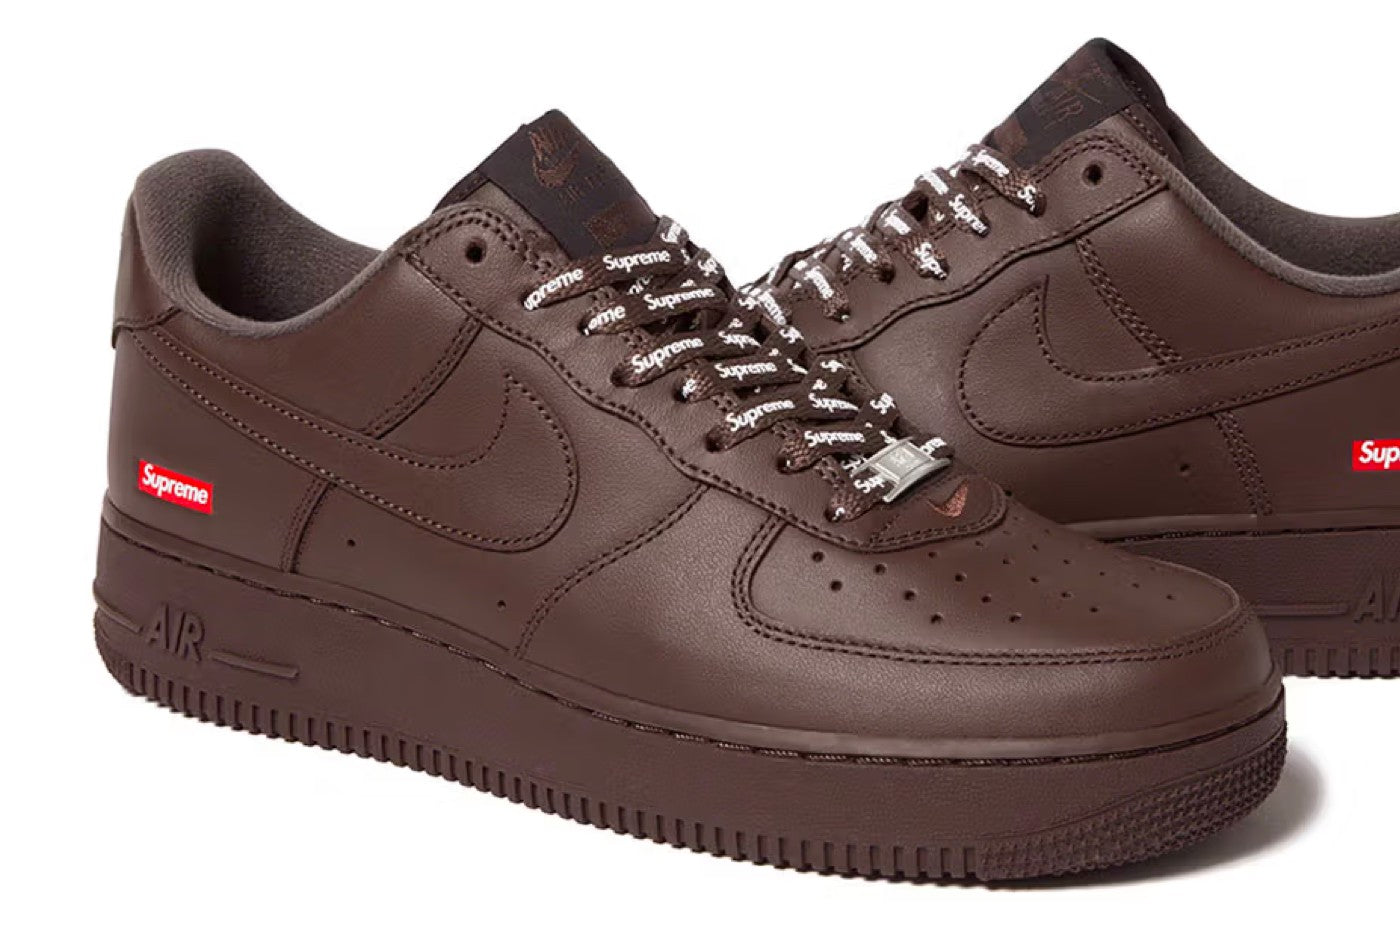 The Supreme x Nike Air Force 1 Baroque Brown Has Finally Been Confir -  The Edit LDN